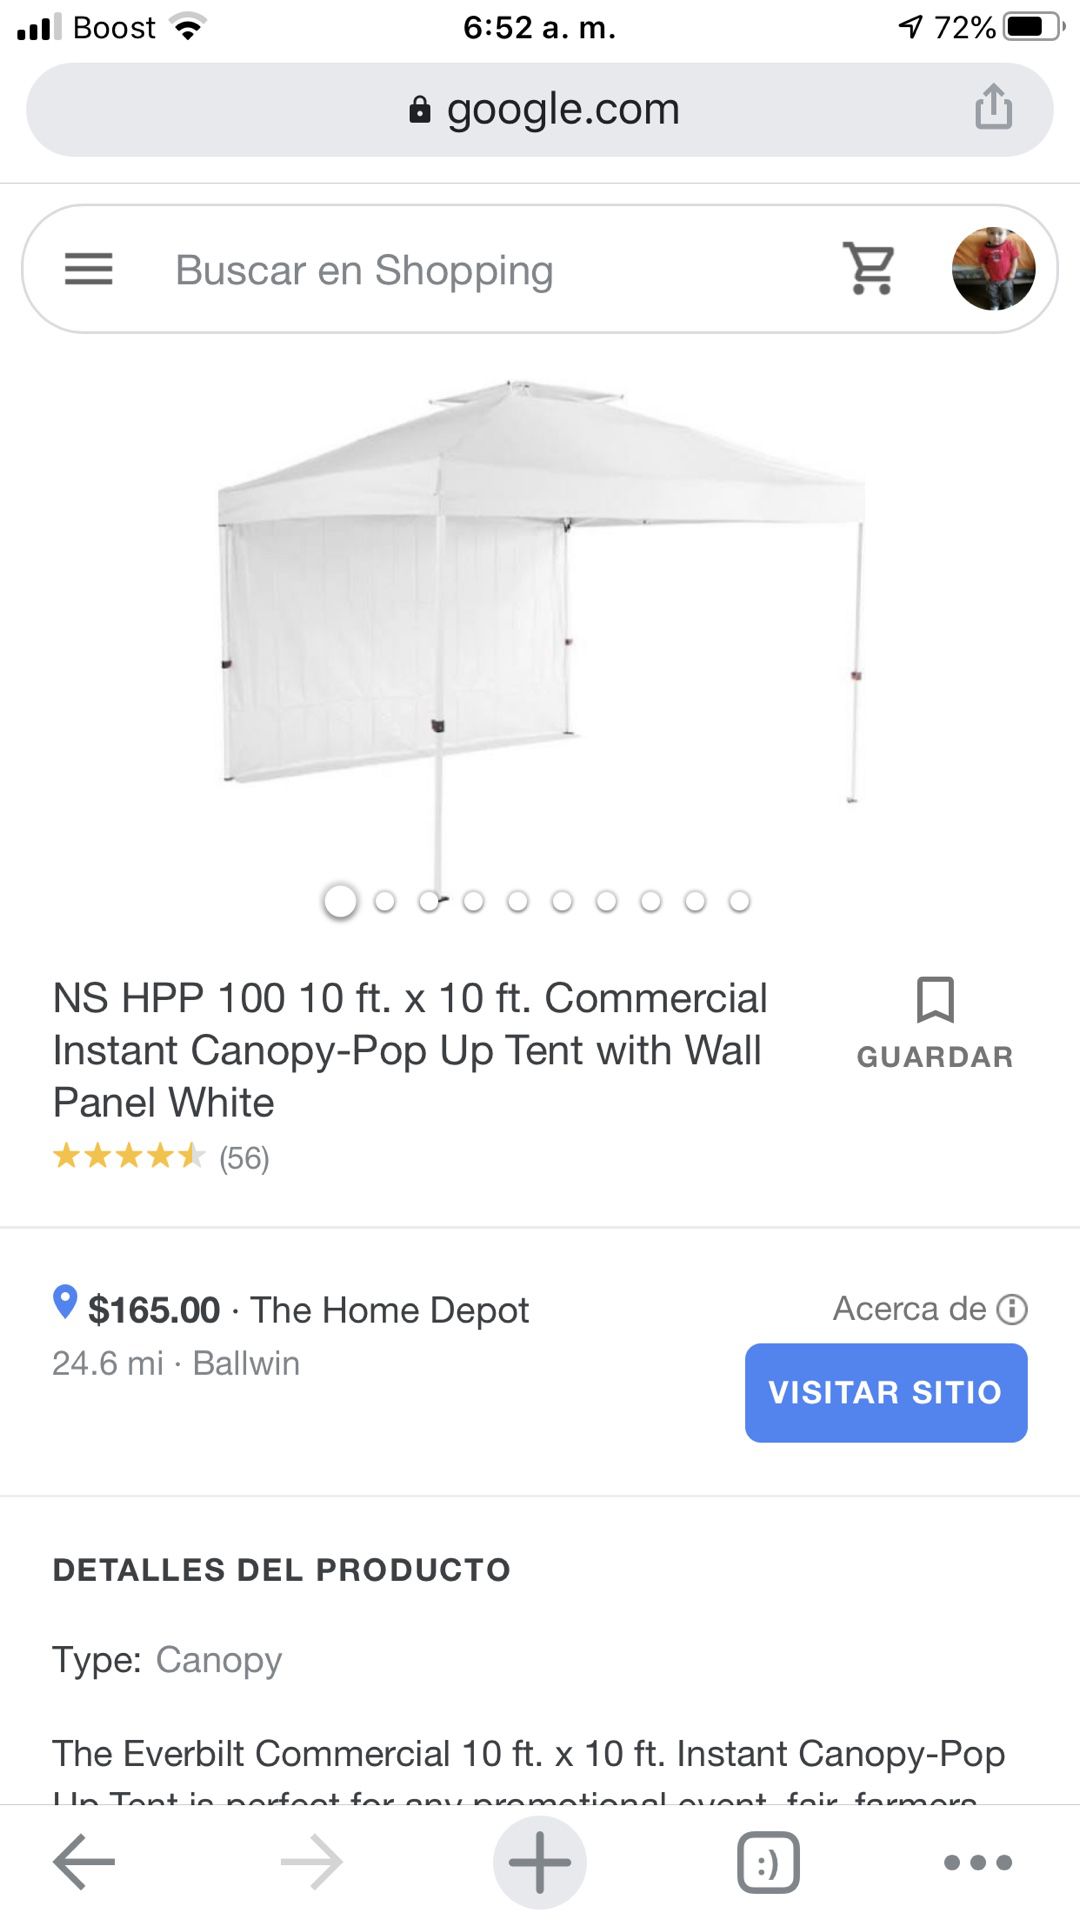 Photo 1010 instant canopy pop up tent with wall panel gray